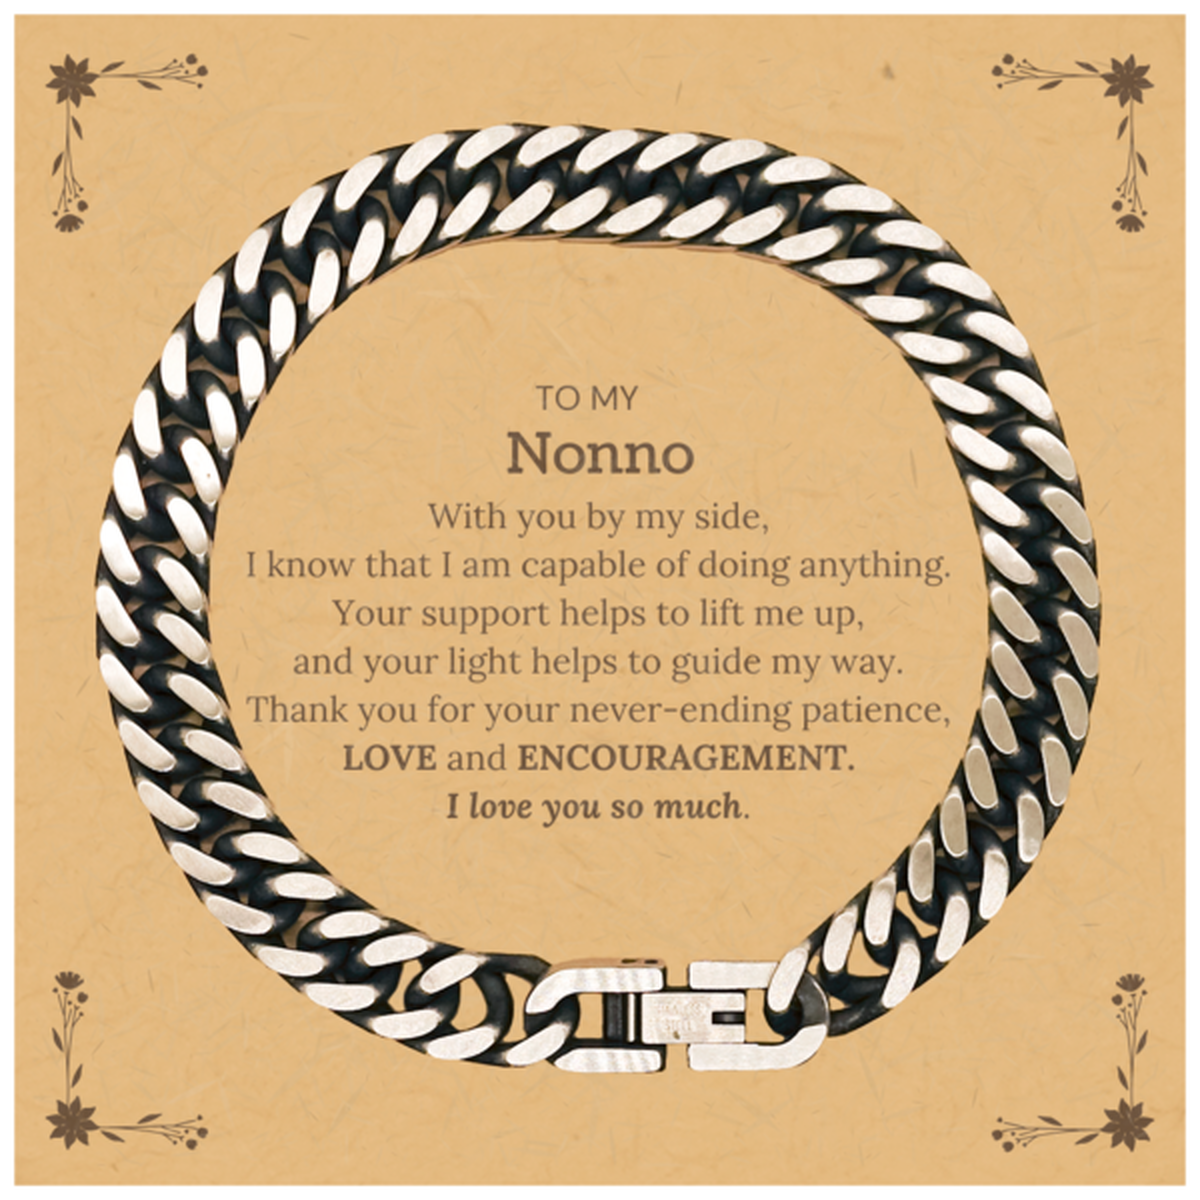 Appreciation Nonno Cuban Link Chain Bracelet Gifts, To My Nonno Birthday Christmas Wedding Keepsake Gifts for Nonno With you by my side, I know that I am capable of doing anything. I love you so much